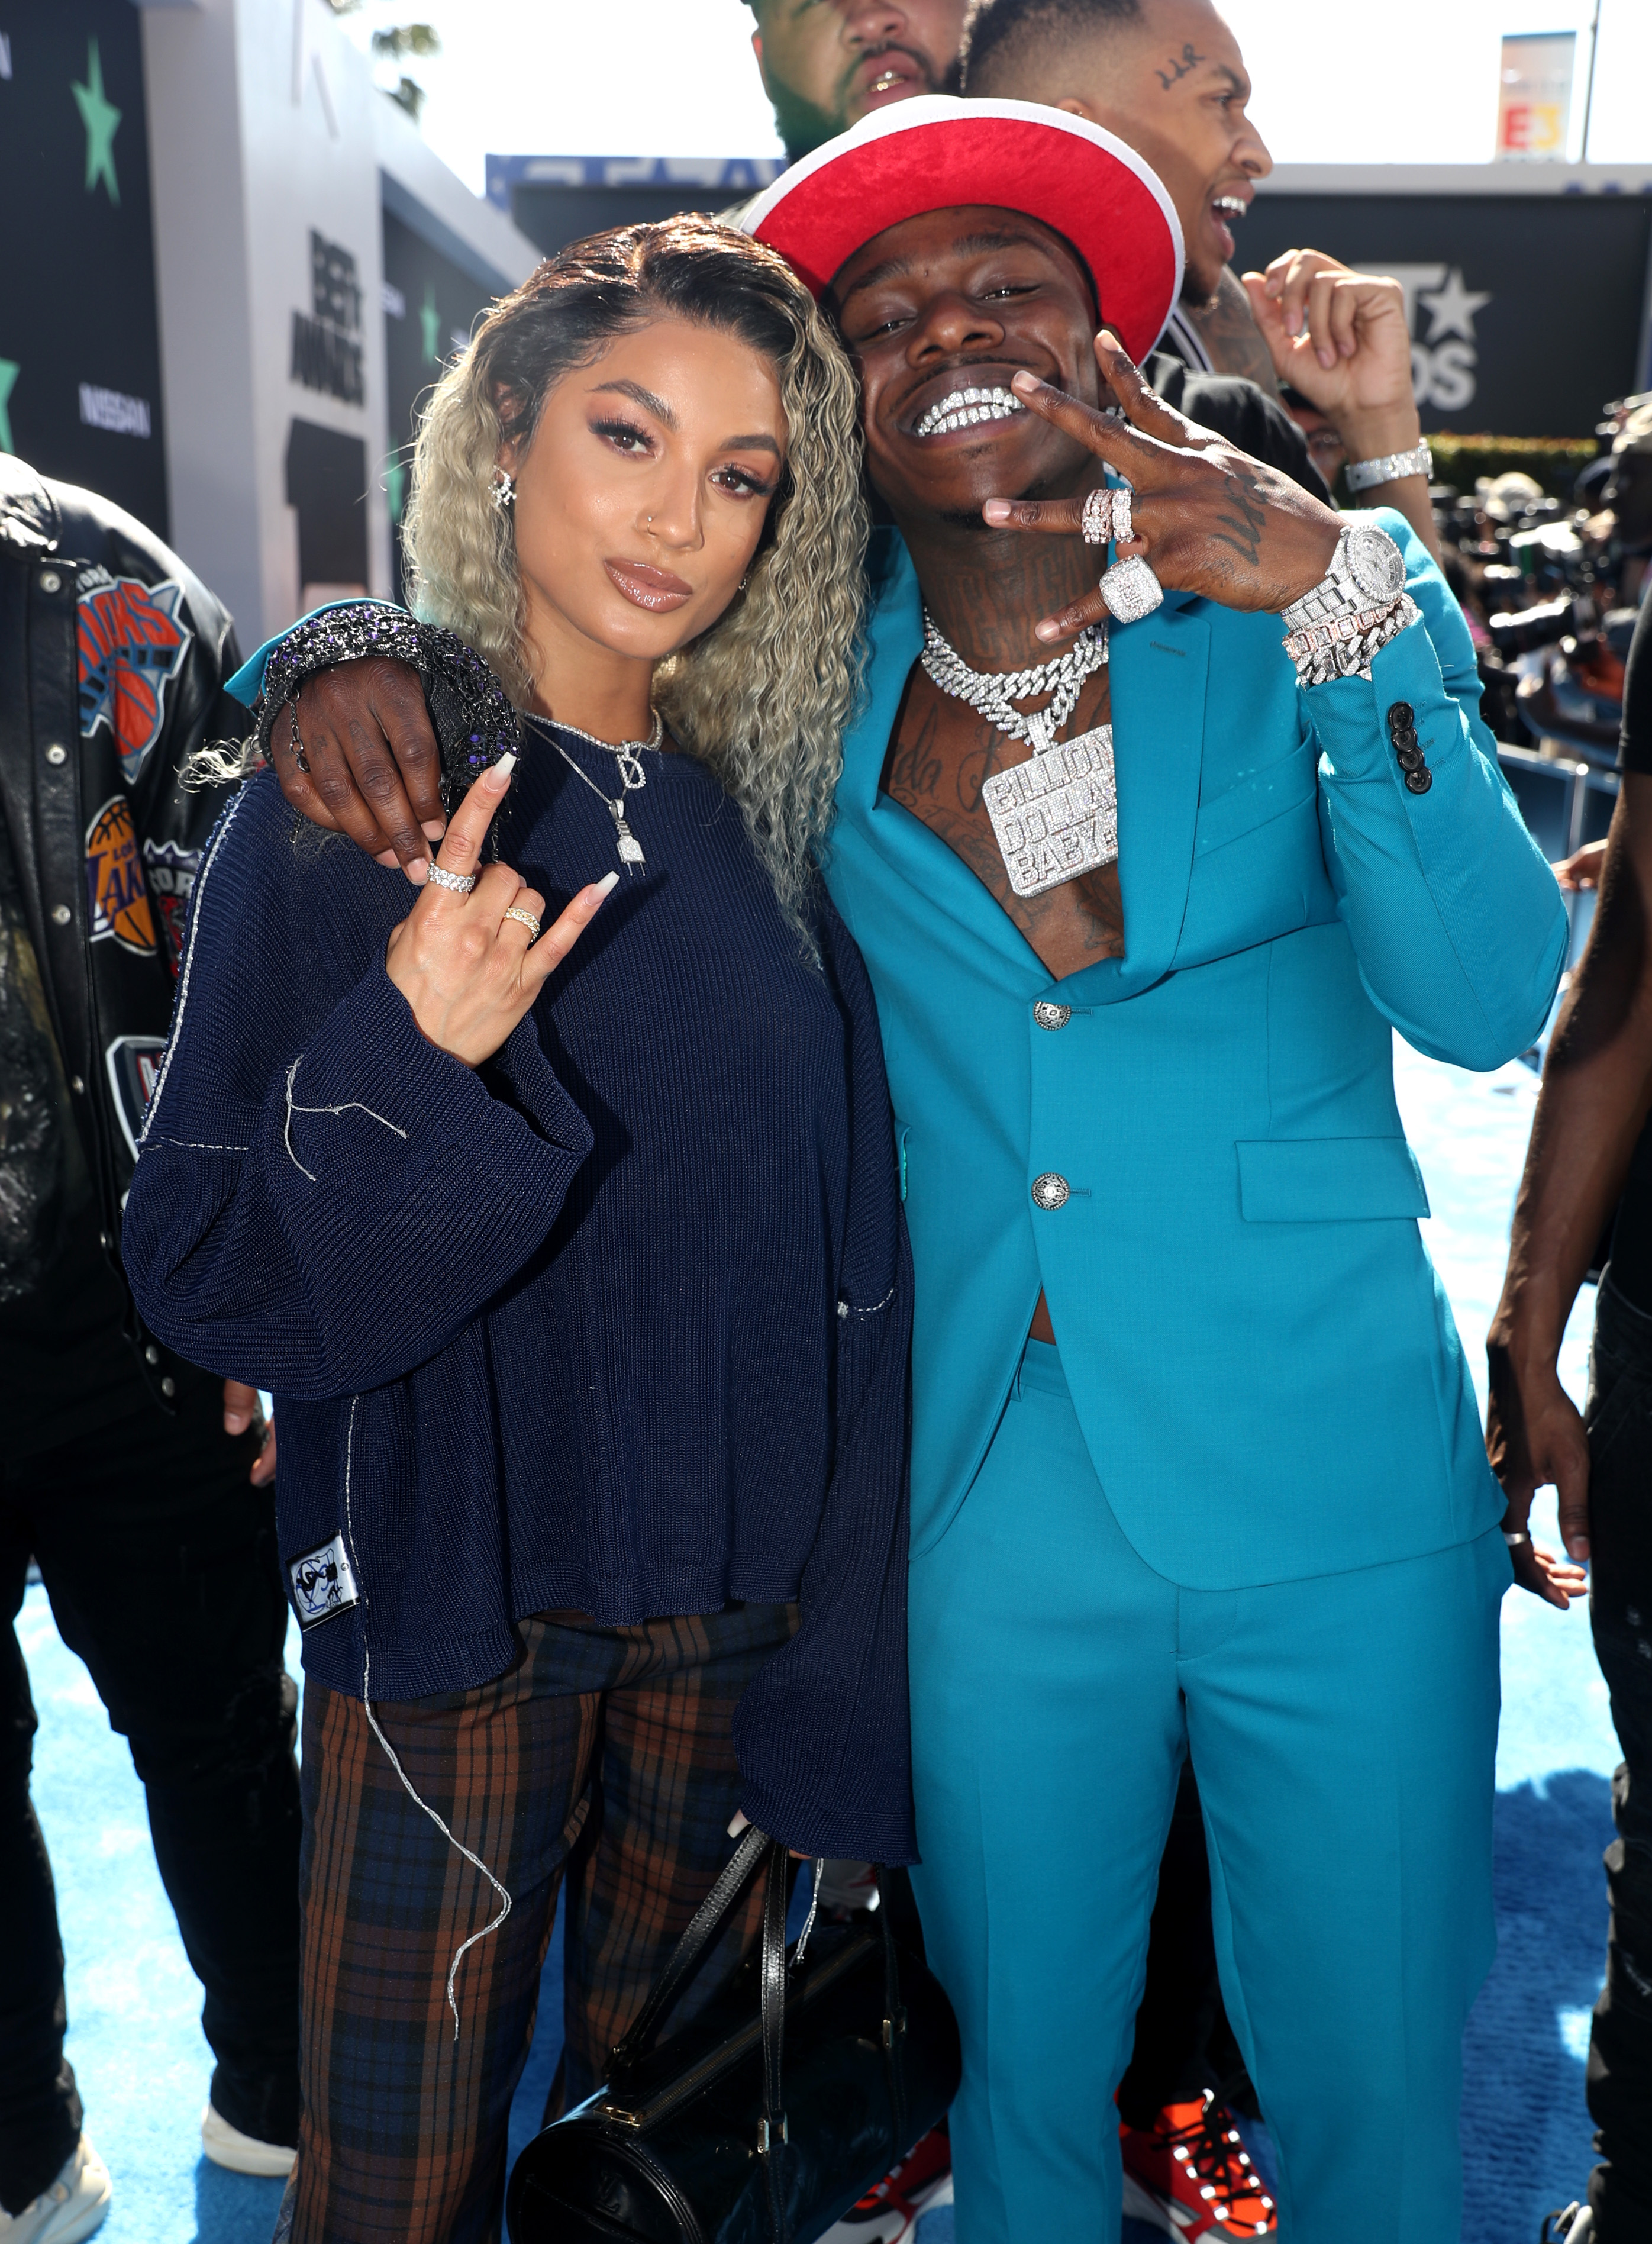 DaniLeigh and DaBaby at the 2019 BET Awards on June 23, 2019, in Los Angeles, California. | Source: Getty Images